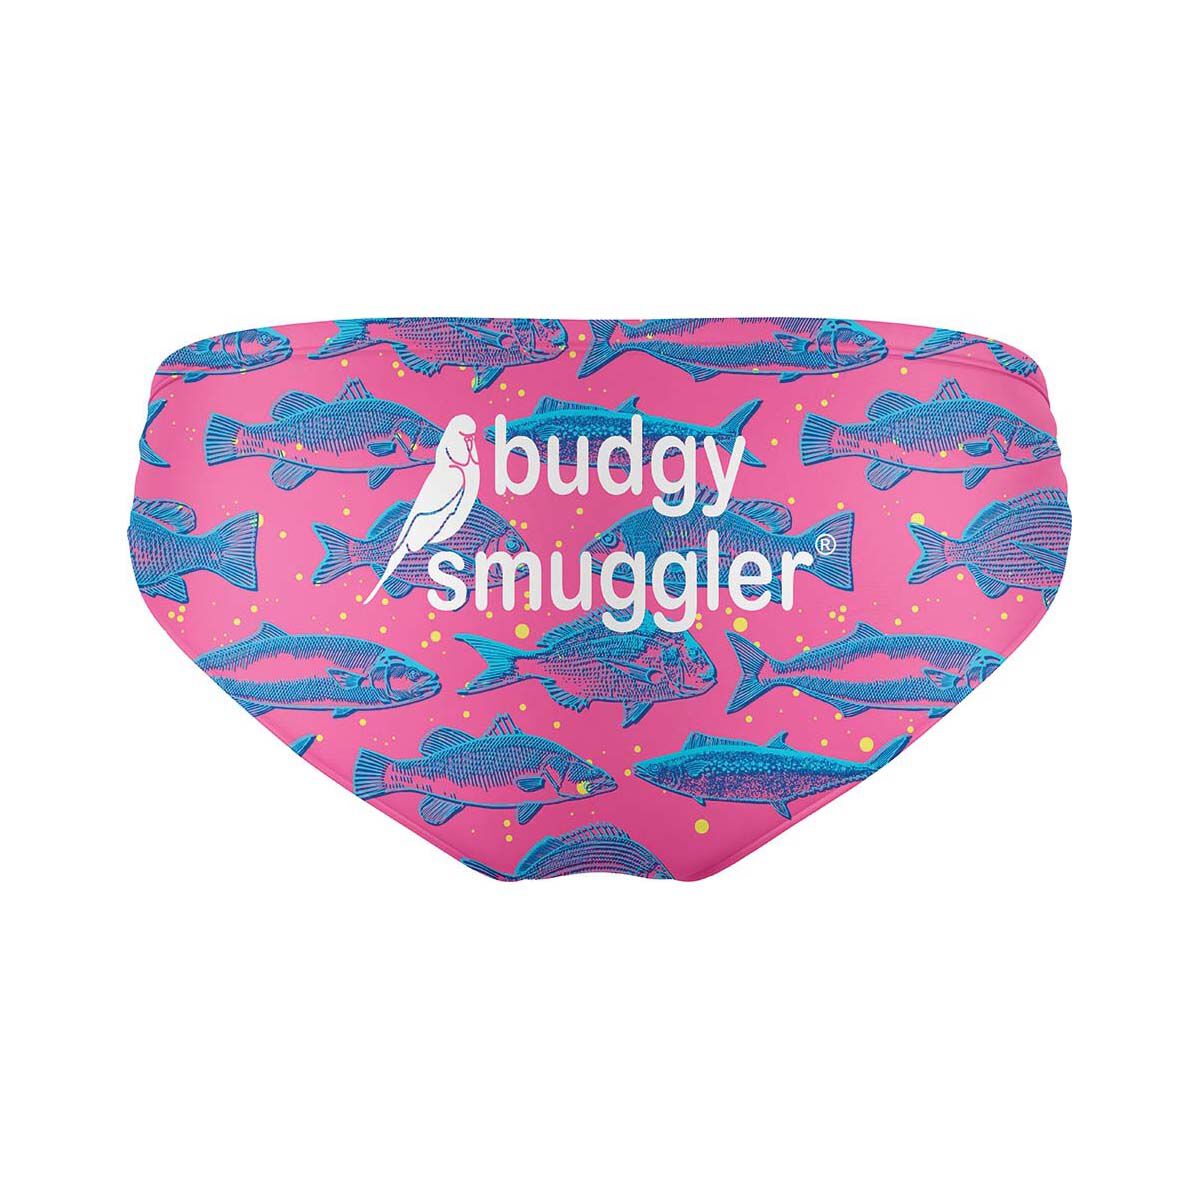 Budgy Smuggler - Pure Public Relations